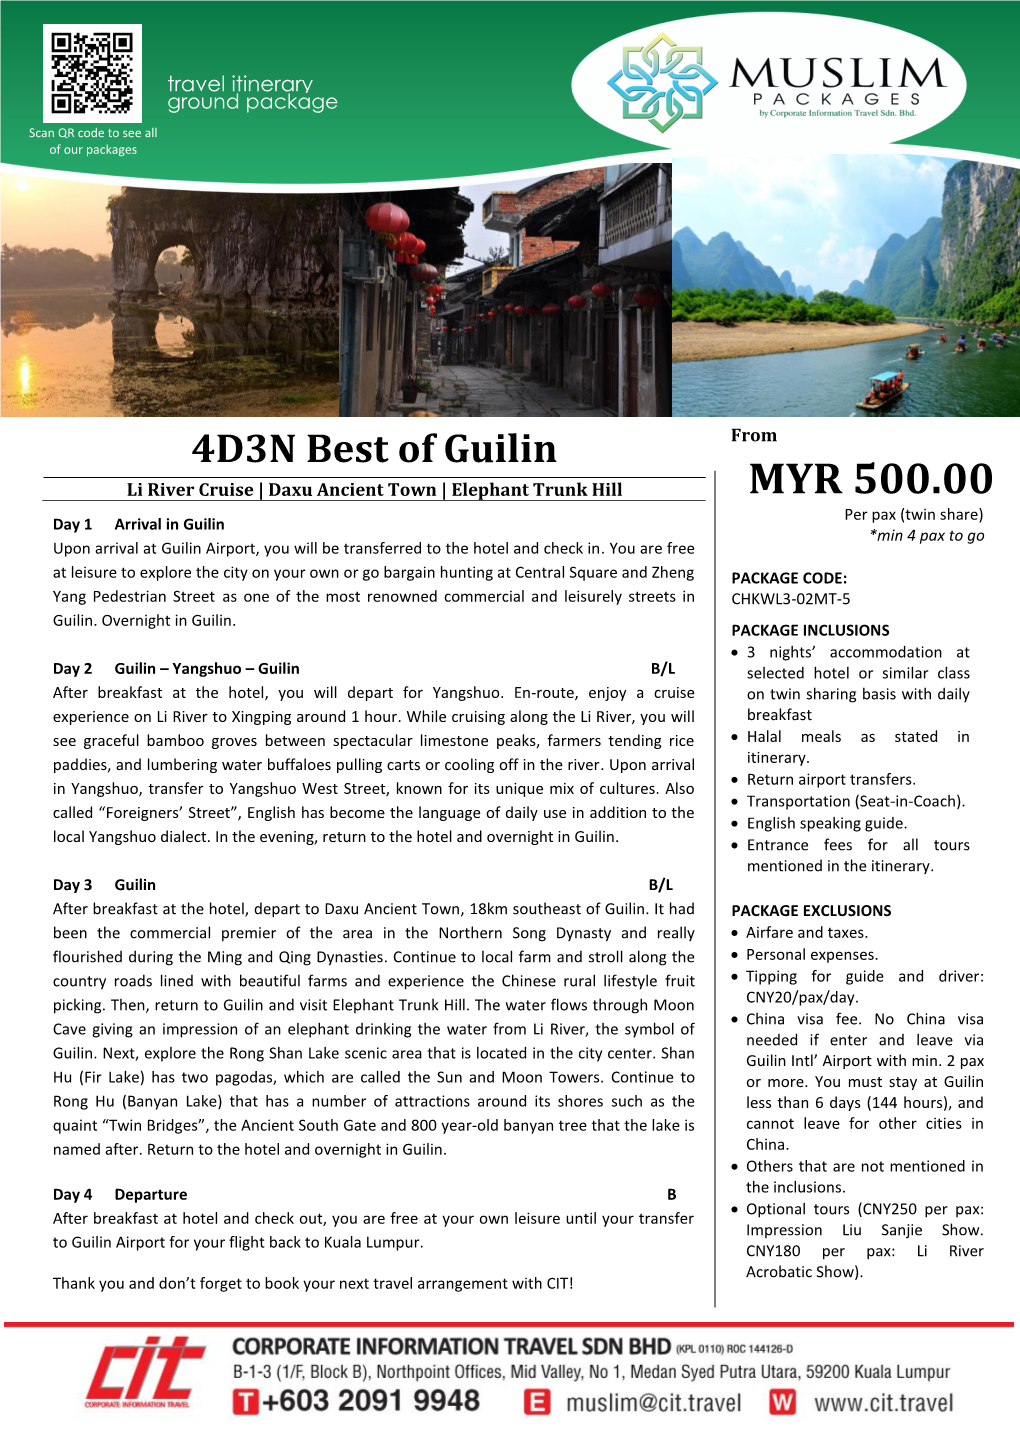 MYR 500.00 Per Pax (Twin Share) Day 1 Arrival in Guilin *Min 4 Pax to Go Upon Arrival at Guilin Airport, You Will Be Transferred to the Hotel and Check In